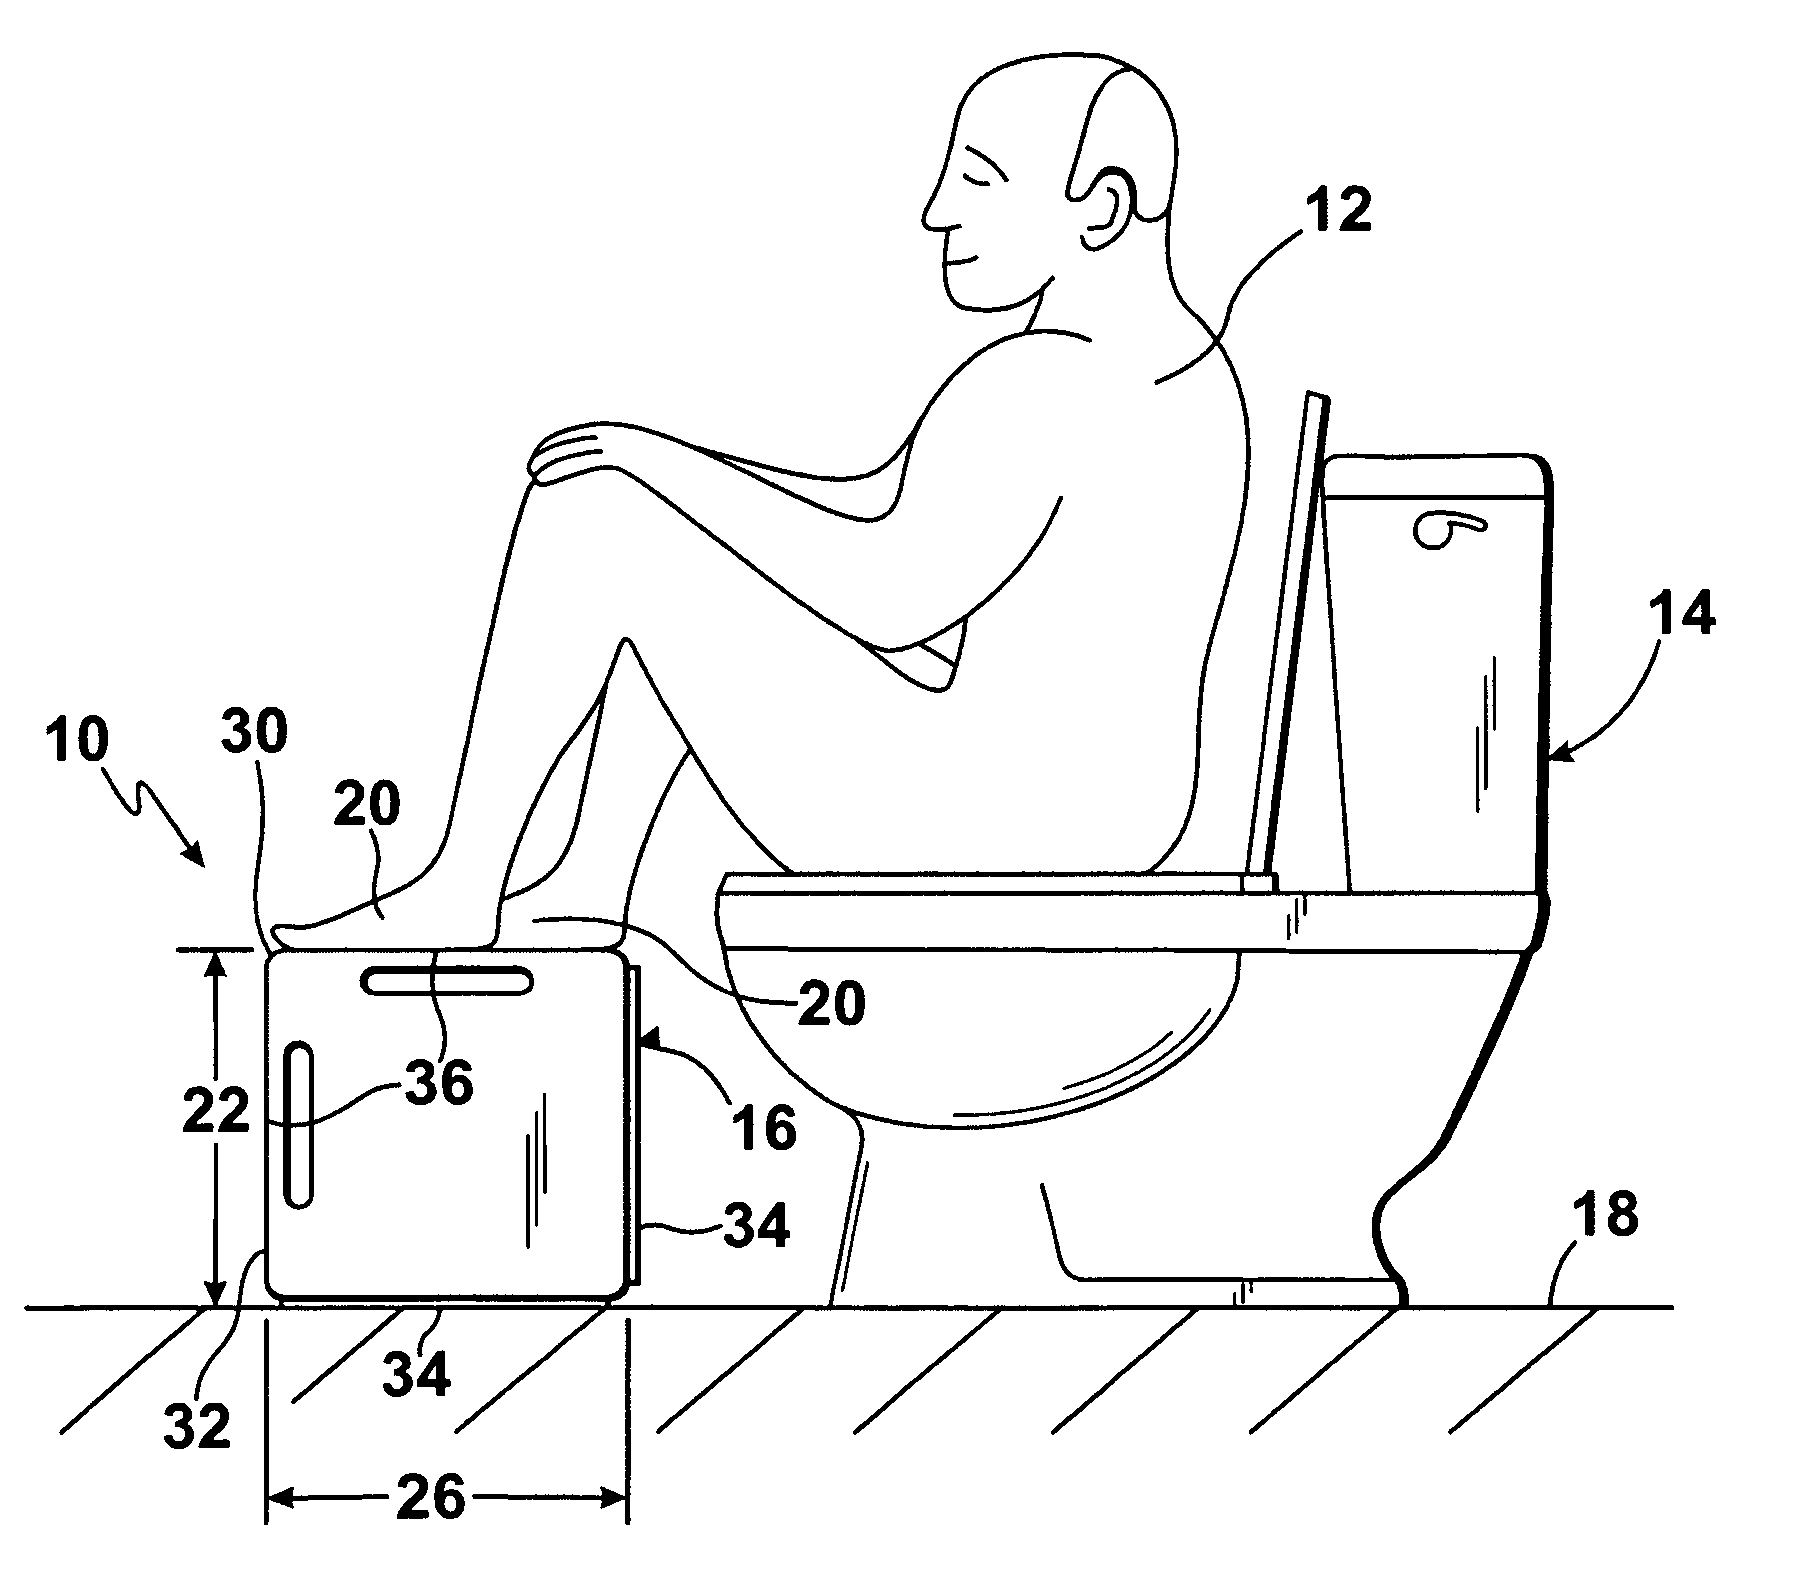 Device for a person to reduce straining during expulsion of fecal matter into a toilet